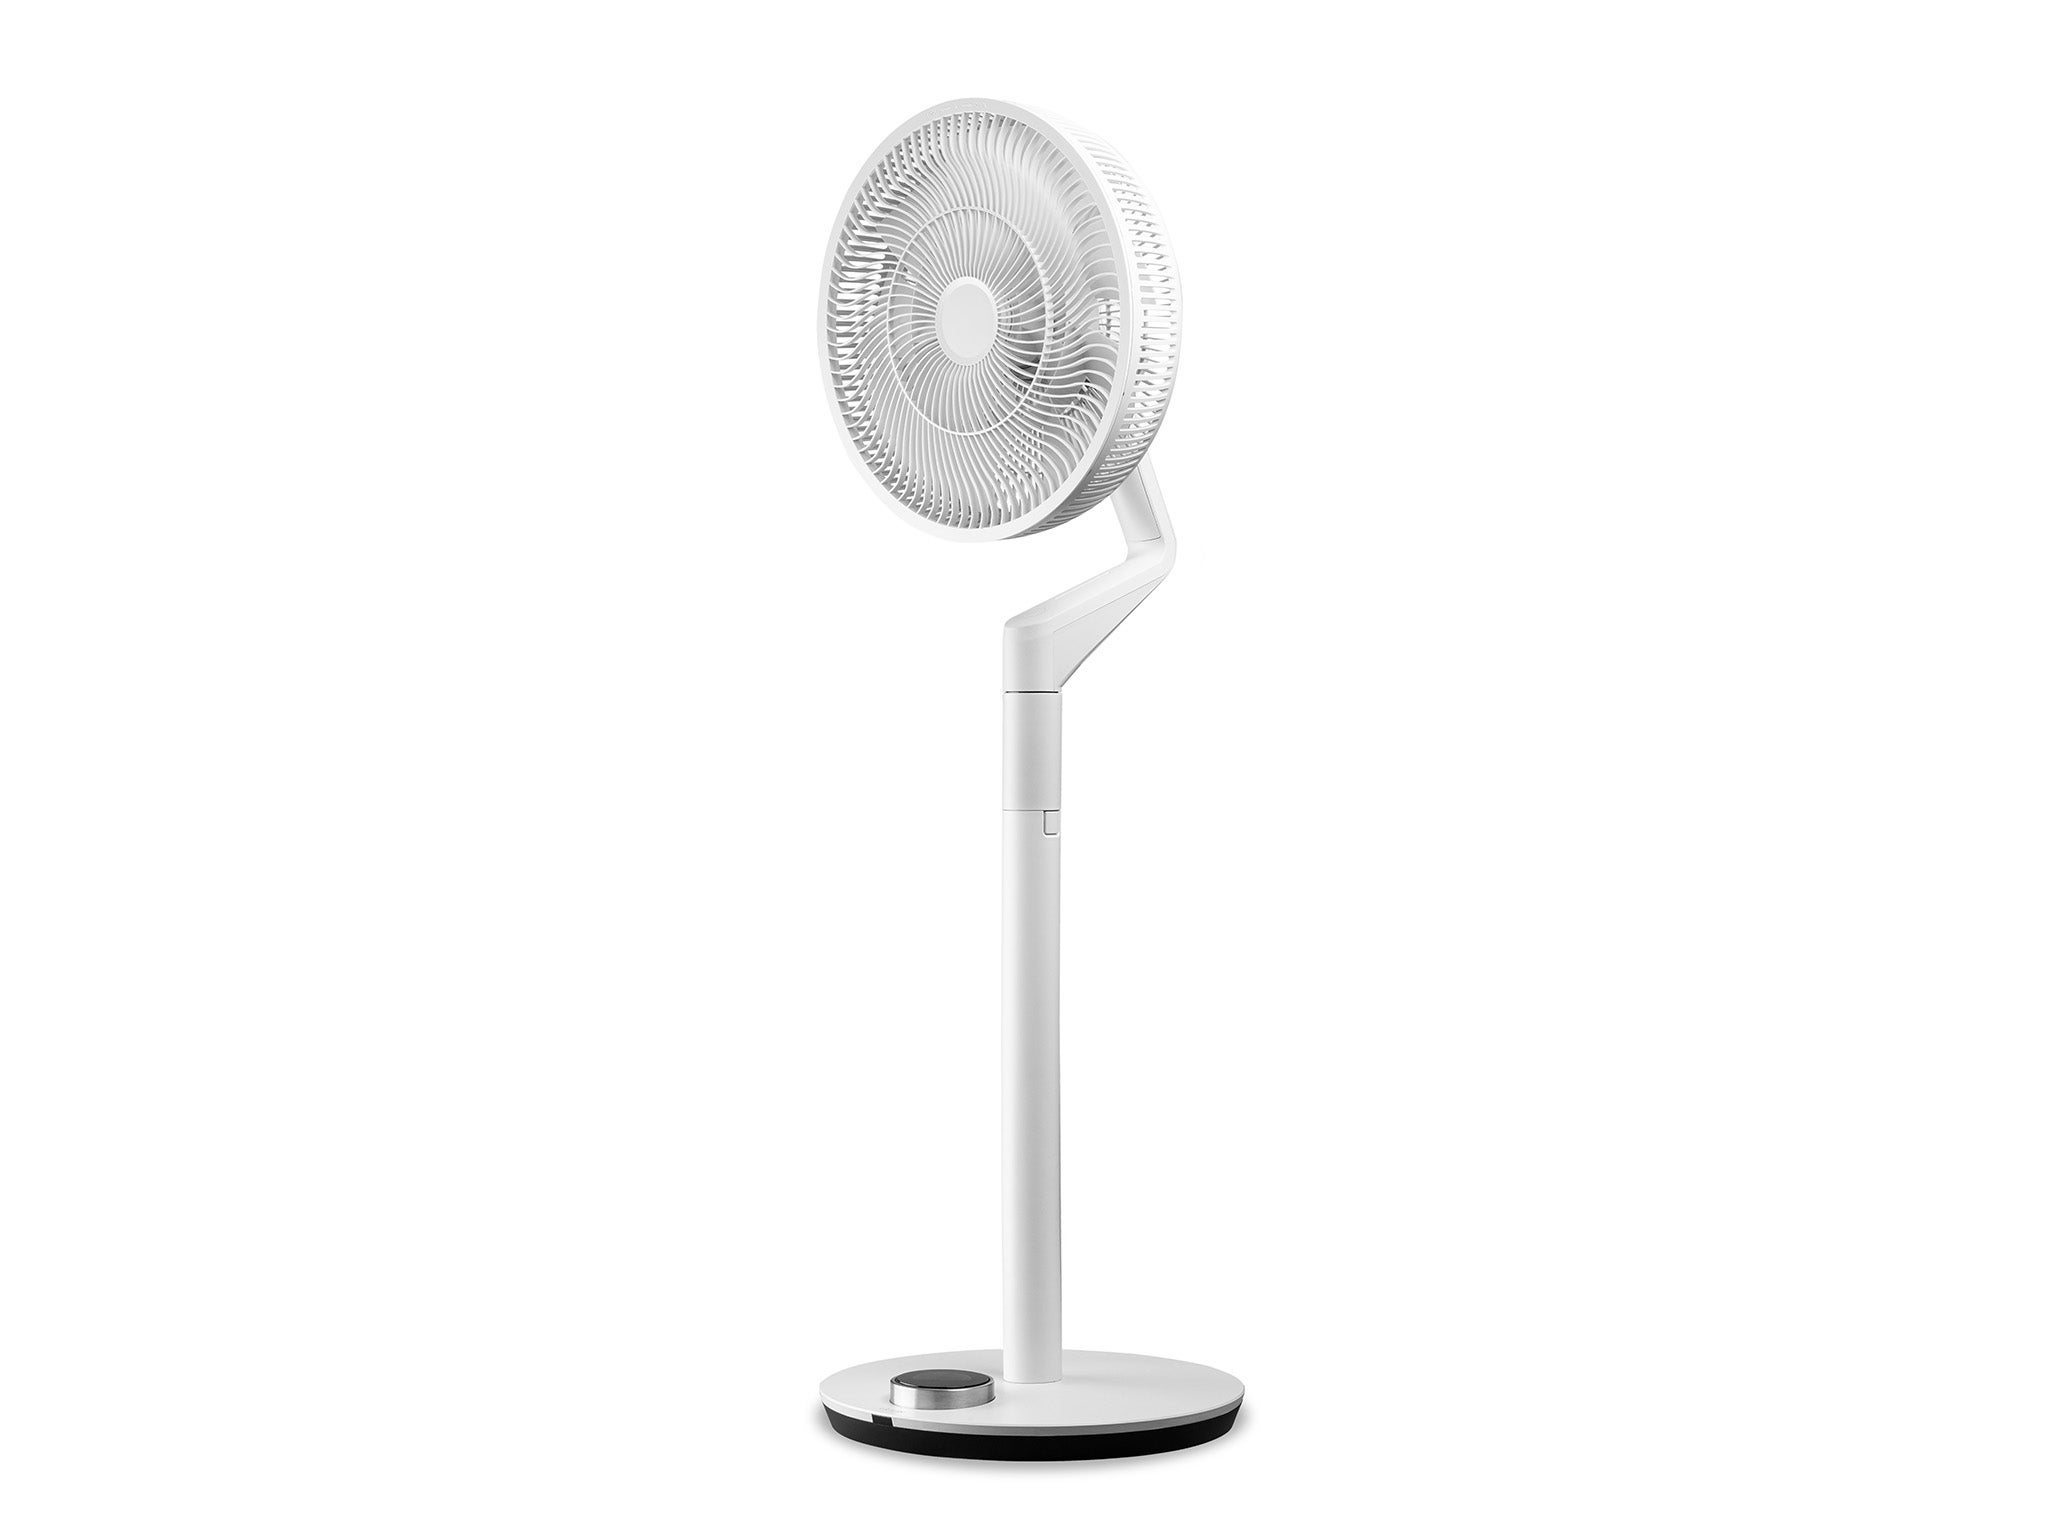 Duux whisper flex ultimate fan and battery pack